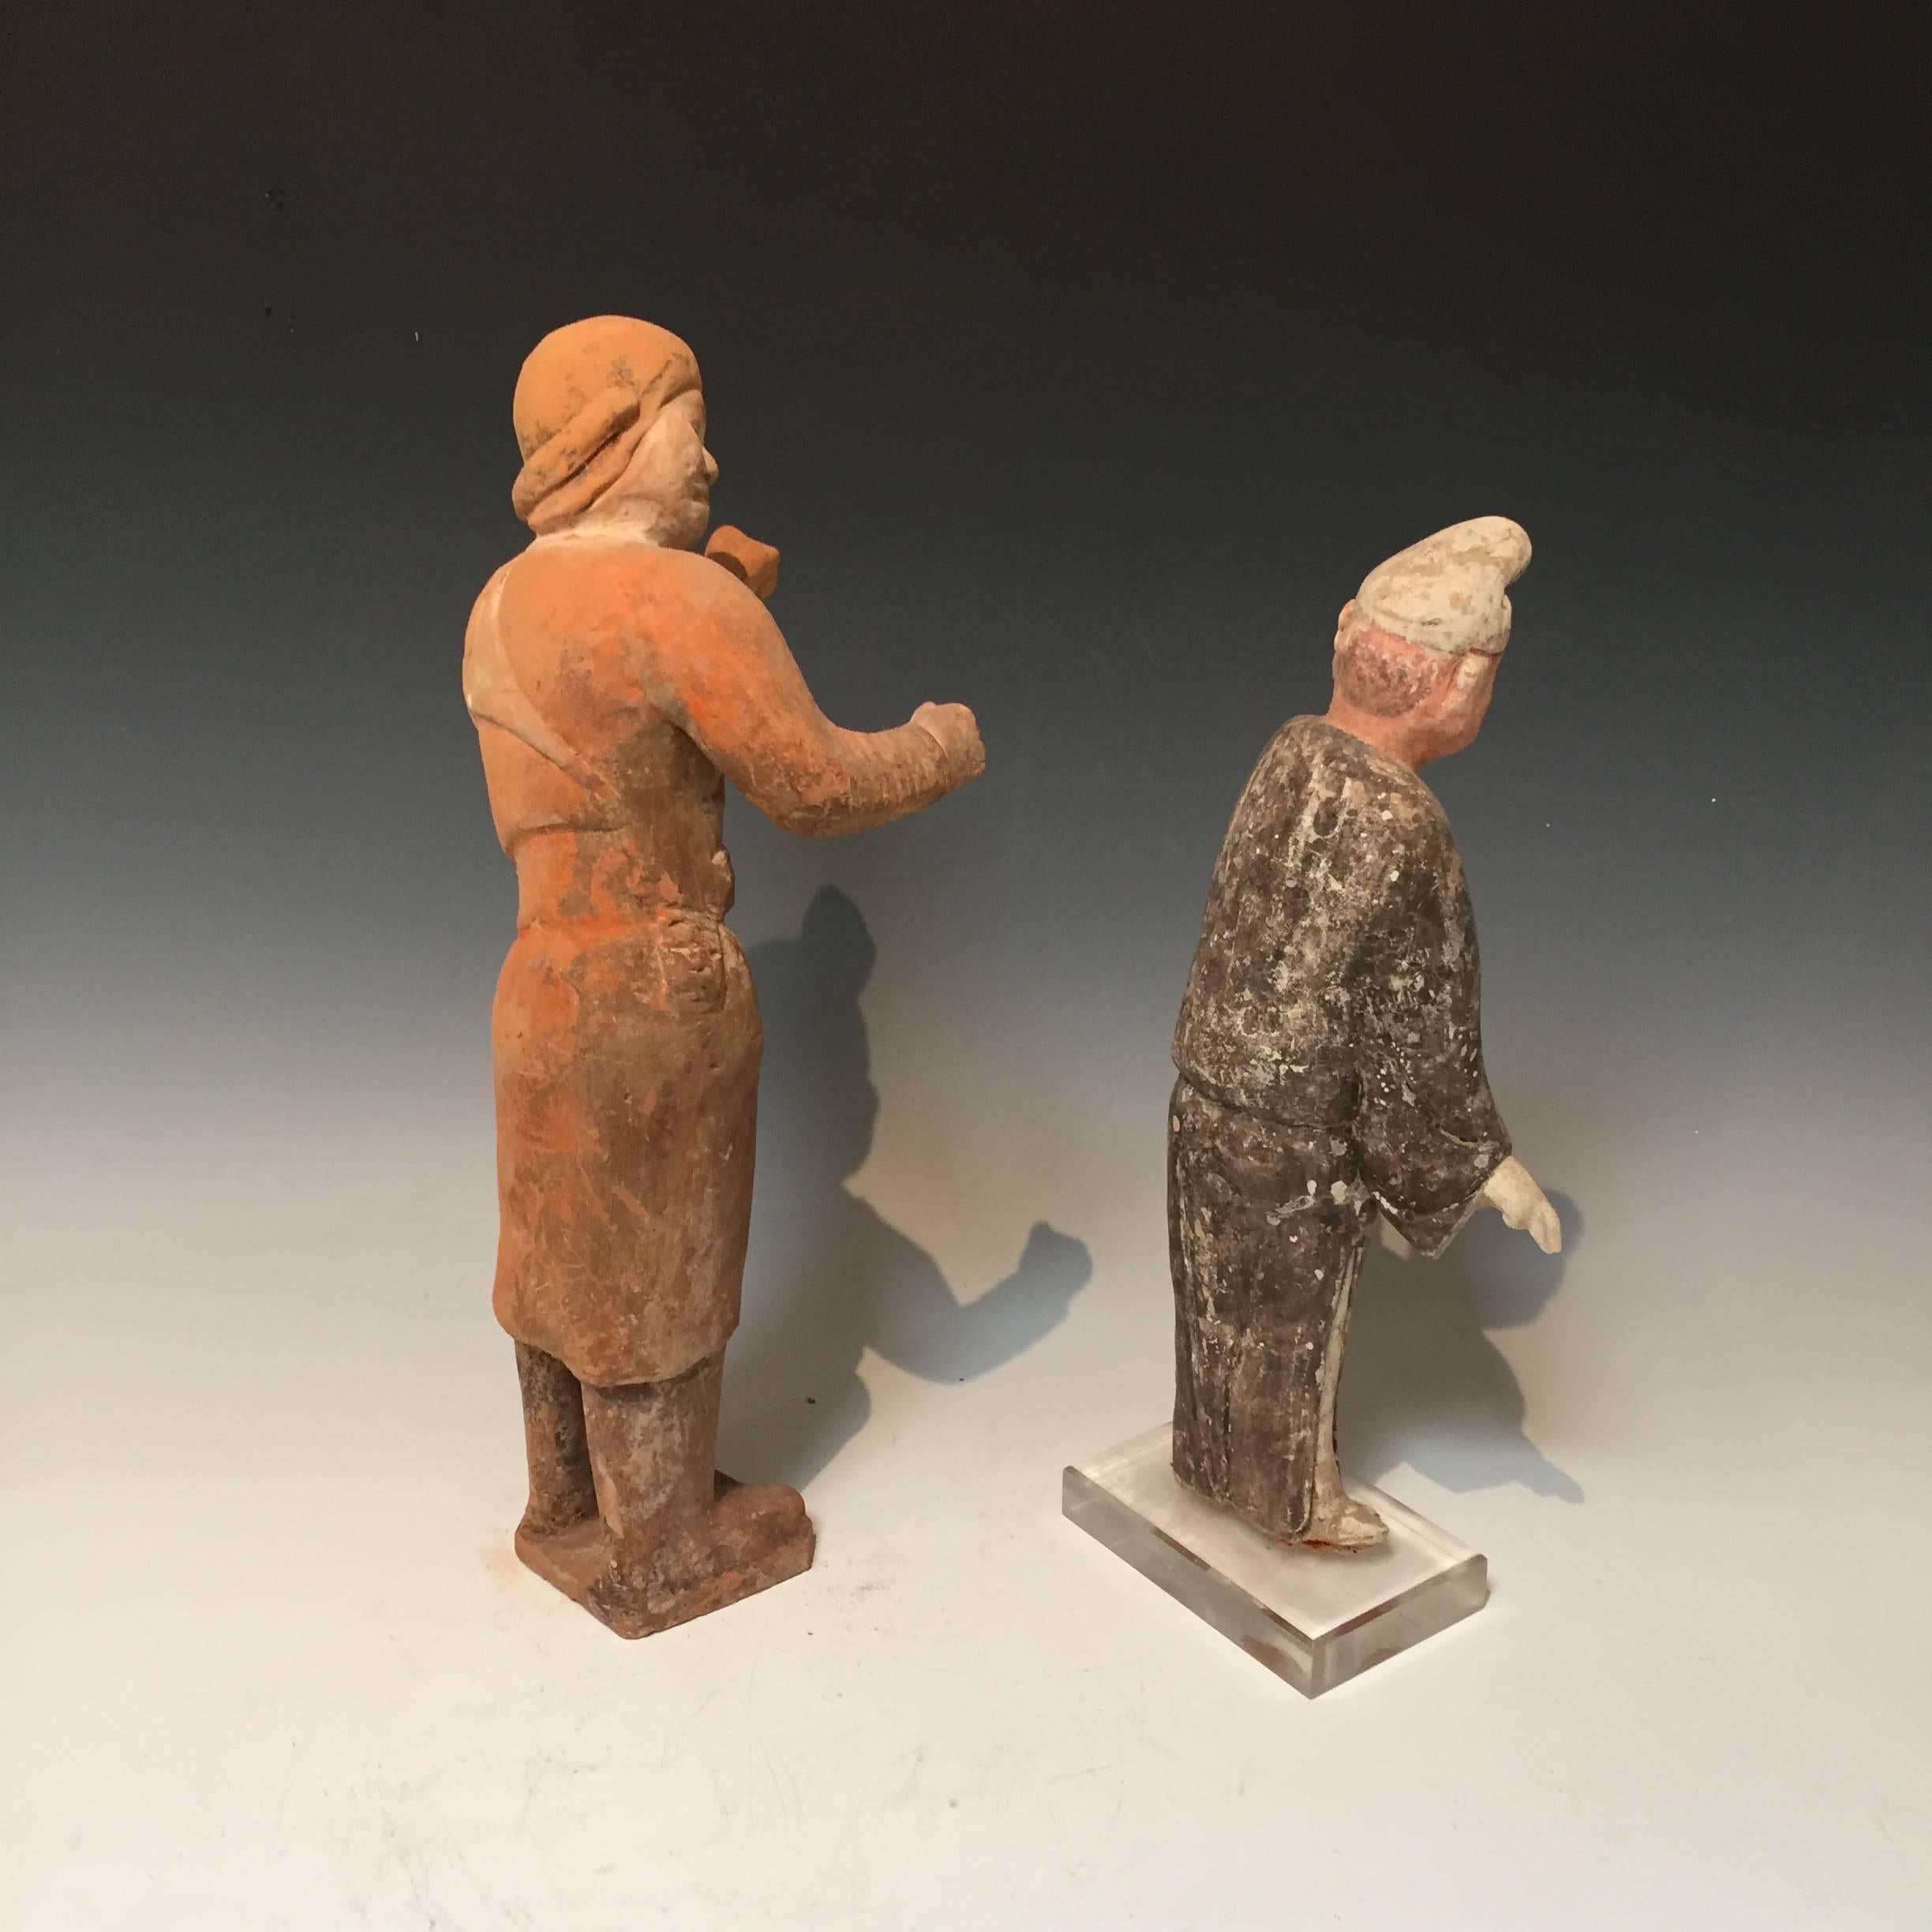 A pair of pottery figures from the Tang dynasty (618-907 A.D.)
One is likely a groom, and the other is a male attendant.
Some original pigments remain.
Groom is 16